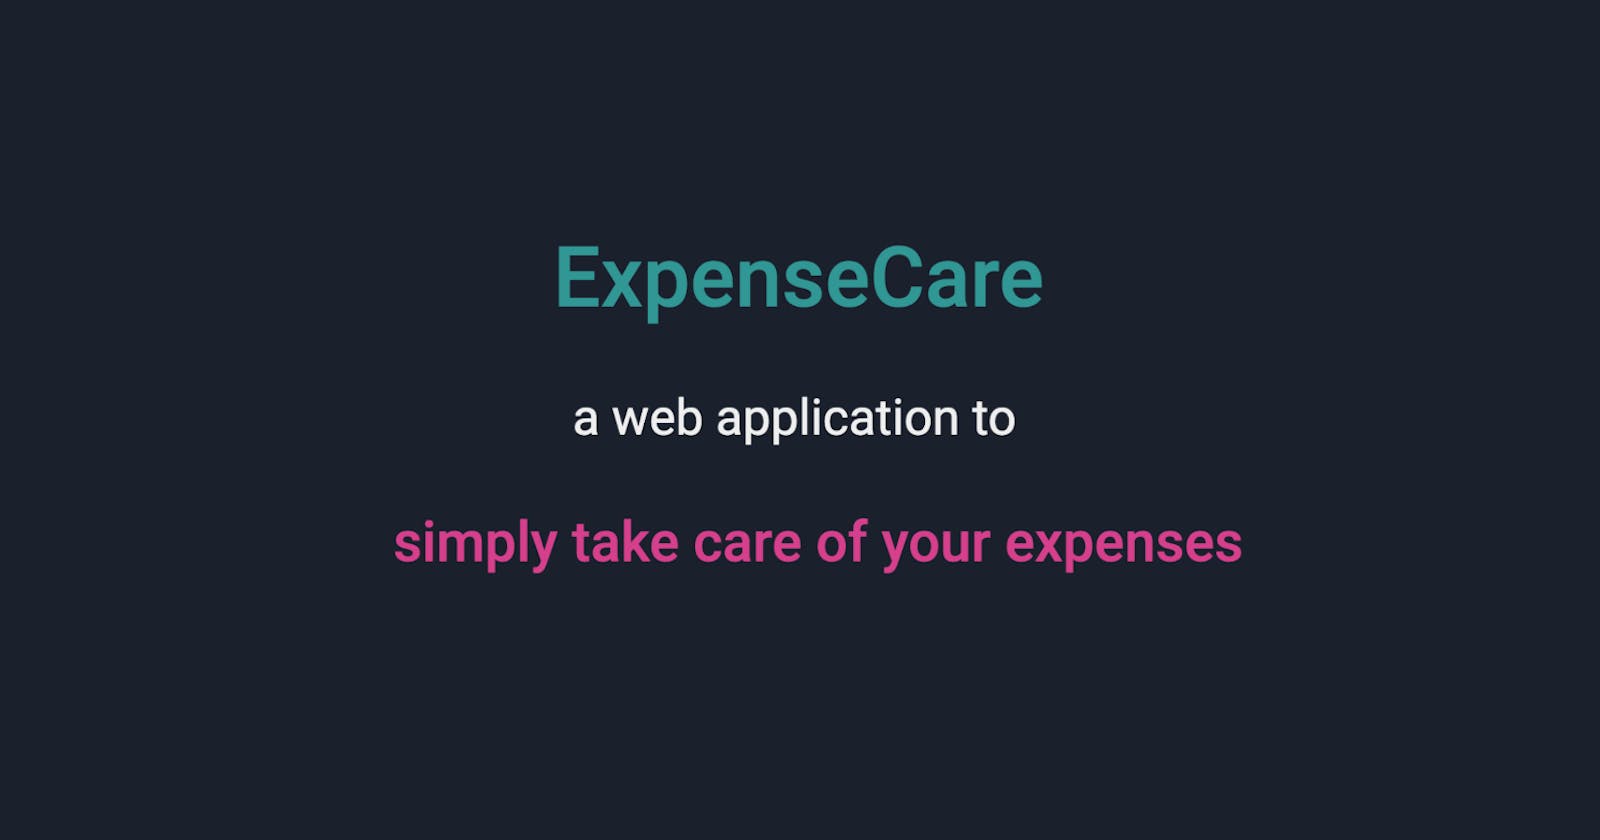 ExpenseCare, Simply take care of your expenses